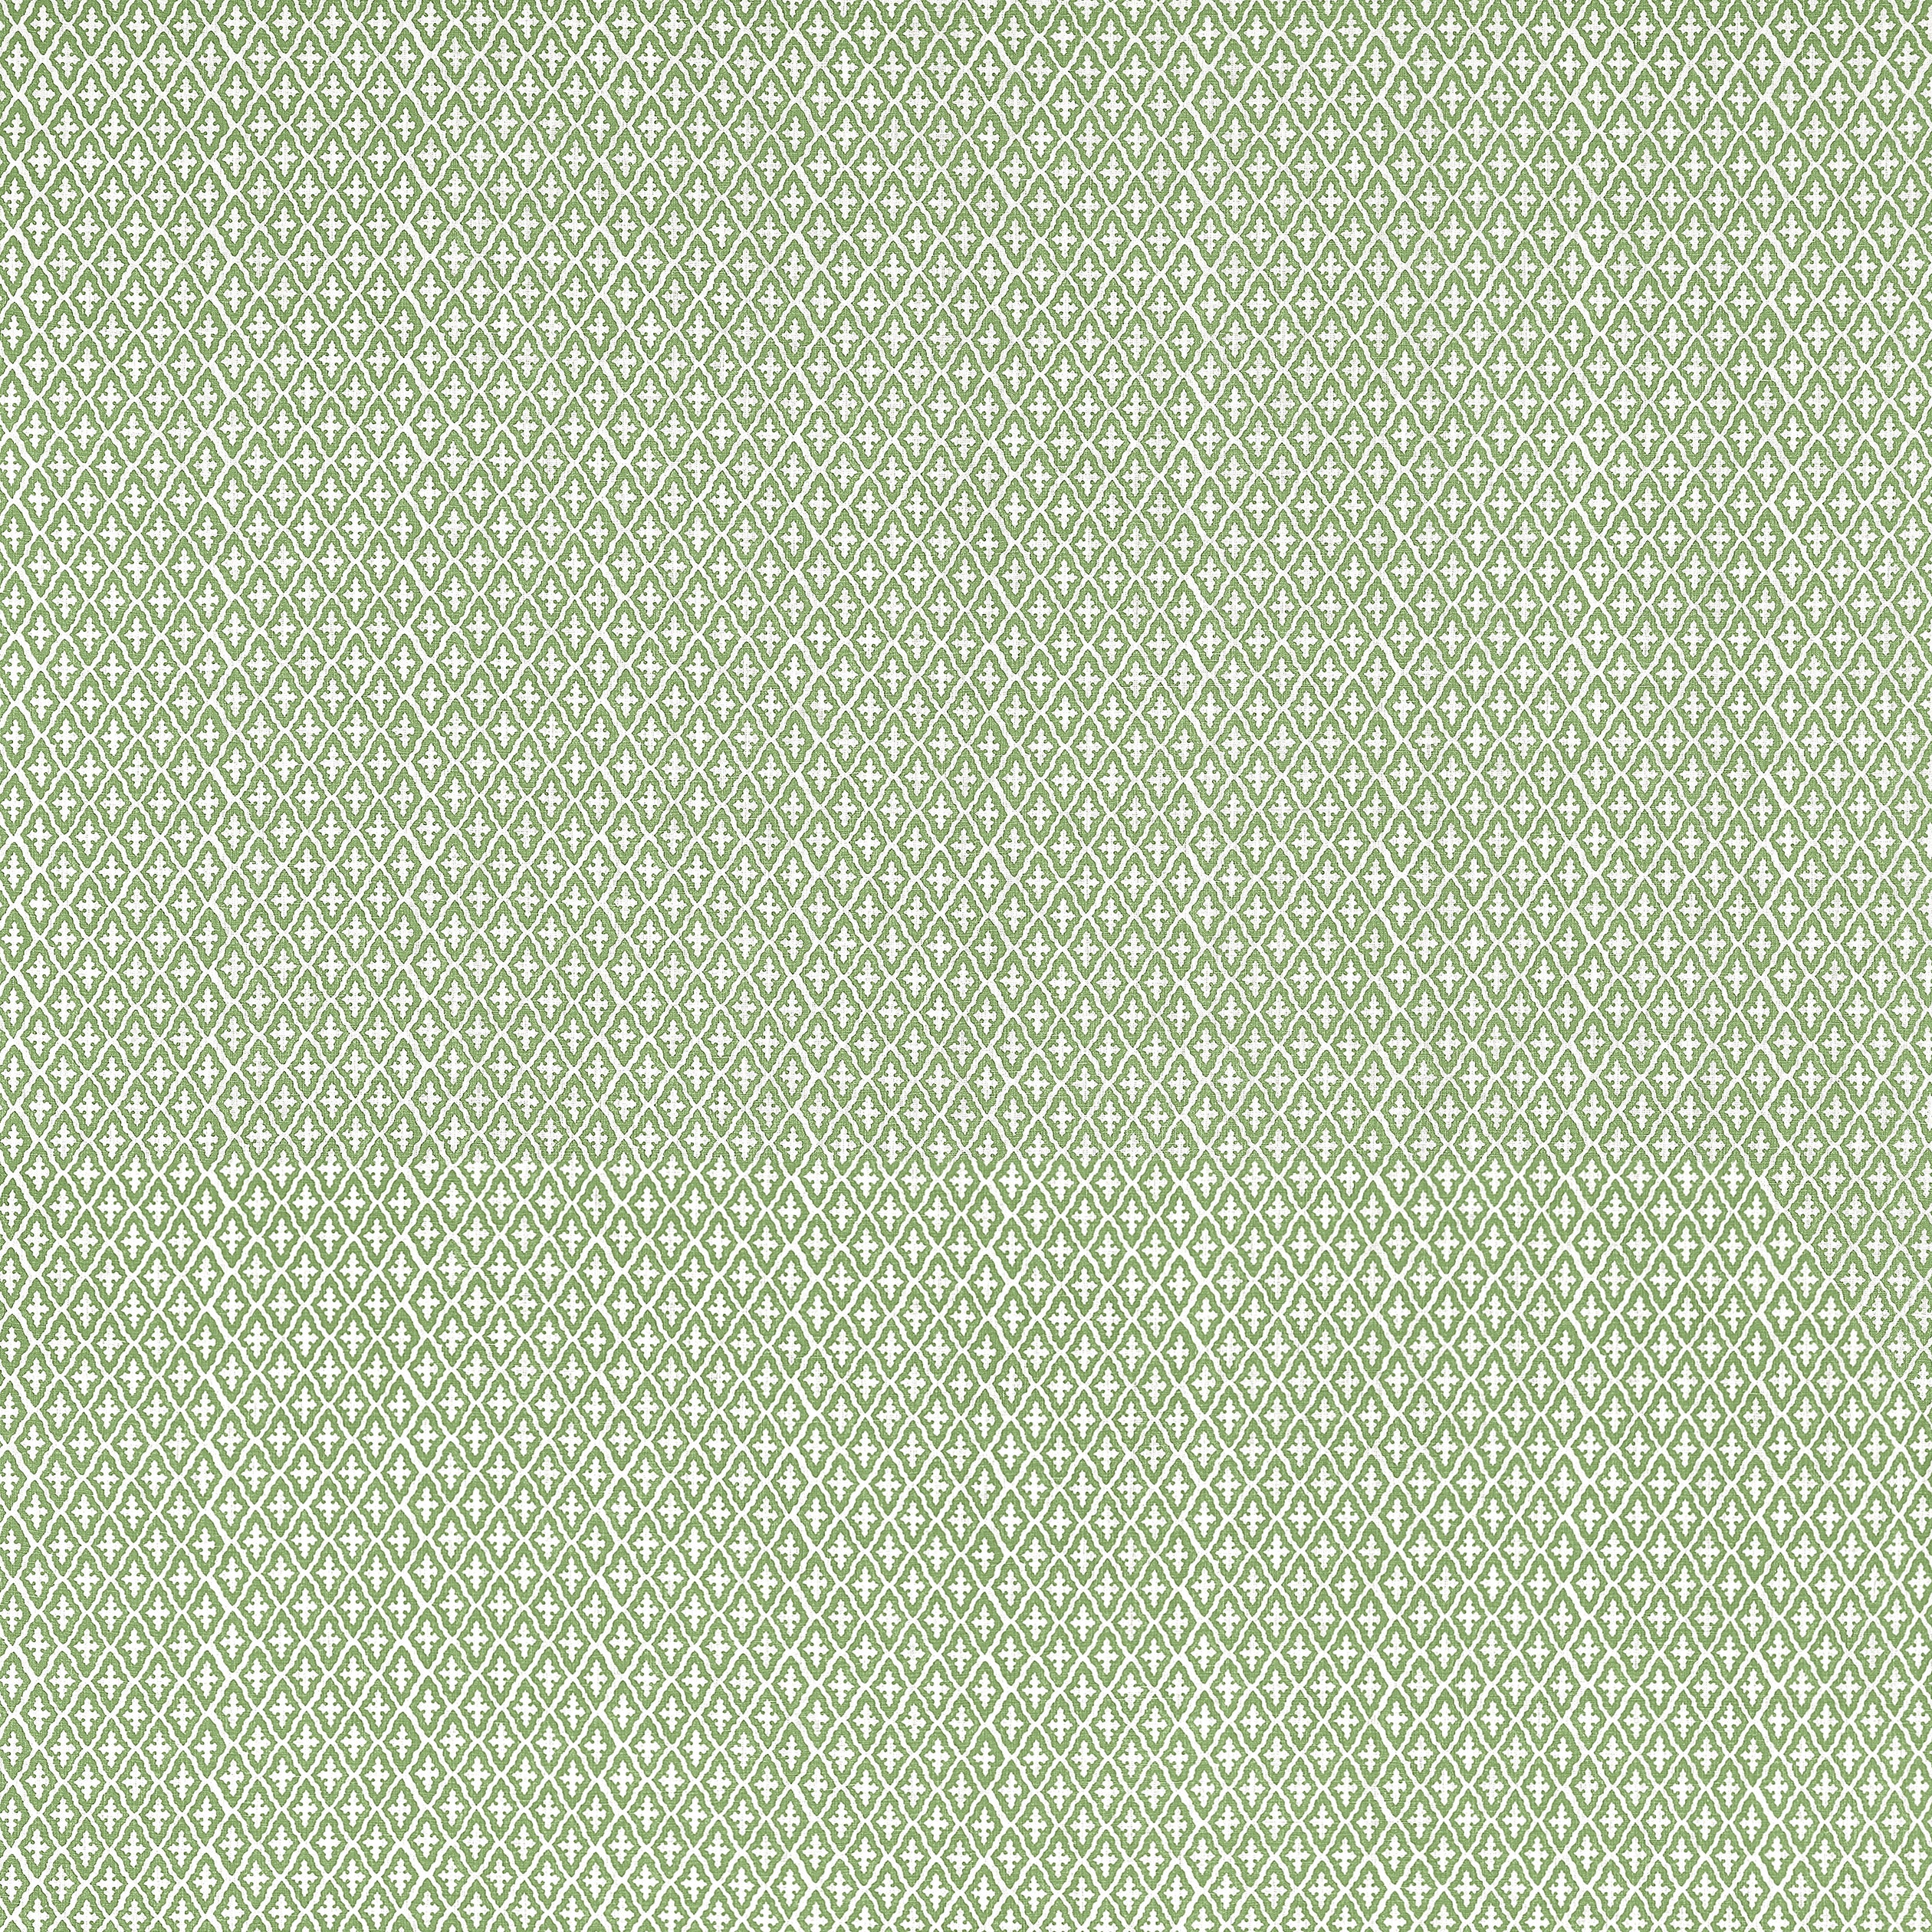 Lindsey fabric in green color - pattern number AF57814 - by Anna French in the Bristol collection